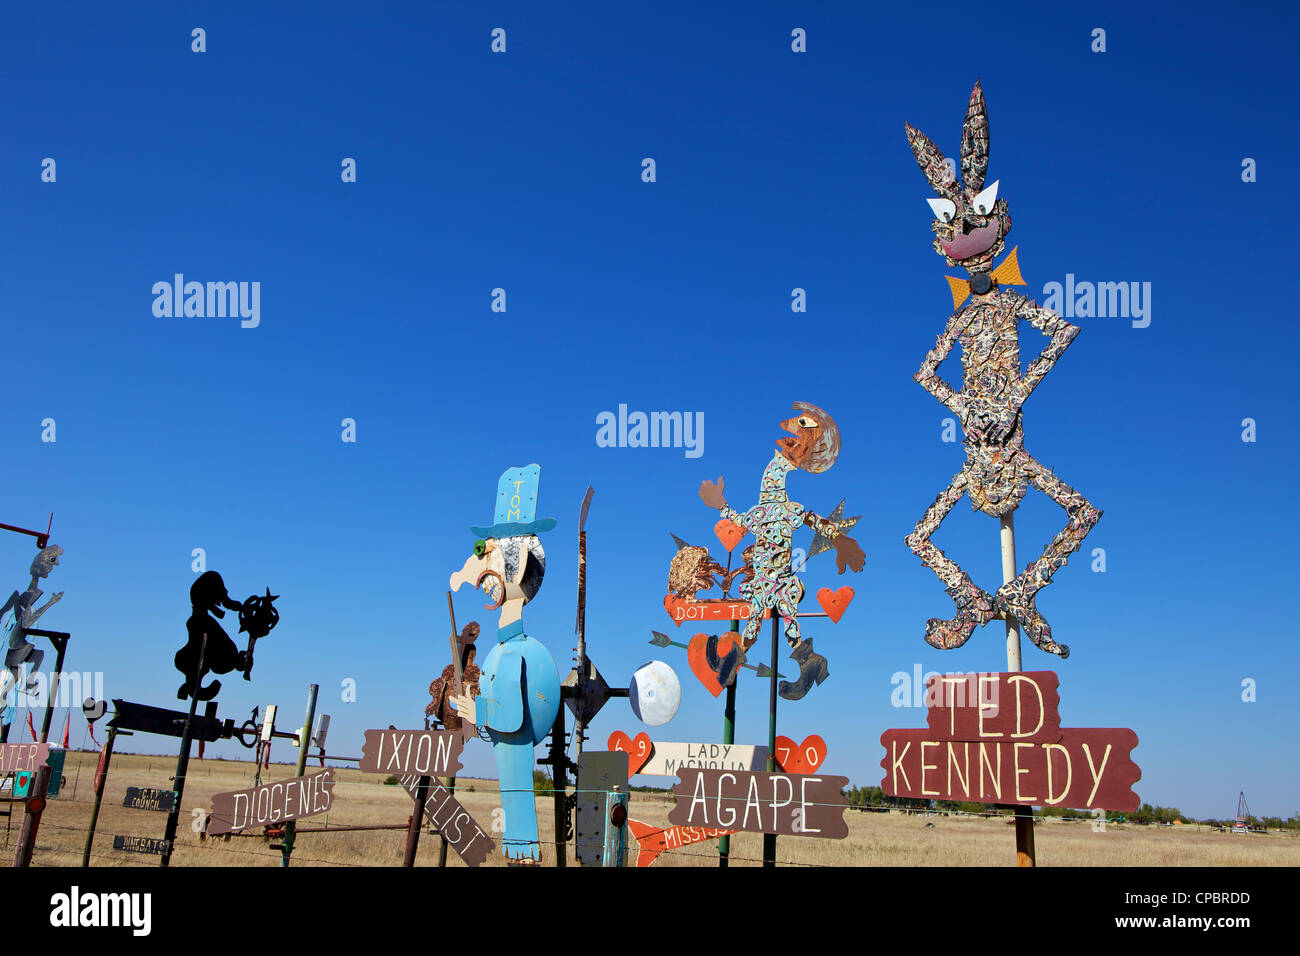 Colourful metal sculptures, Highway 54, Mullinville, Kansas, USA, Stock Photo